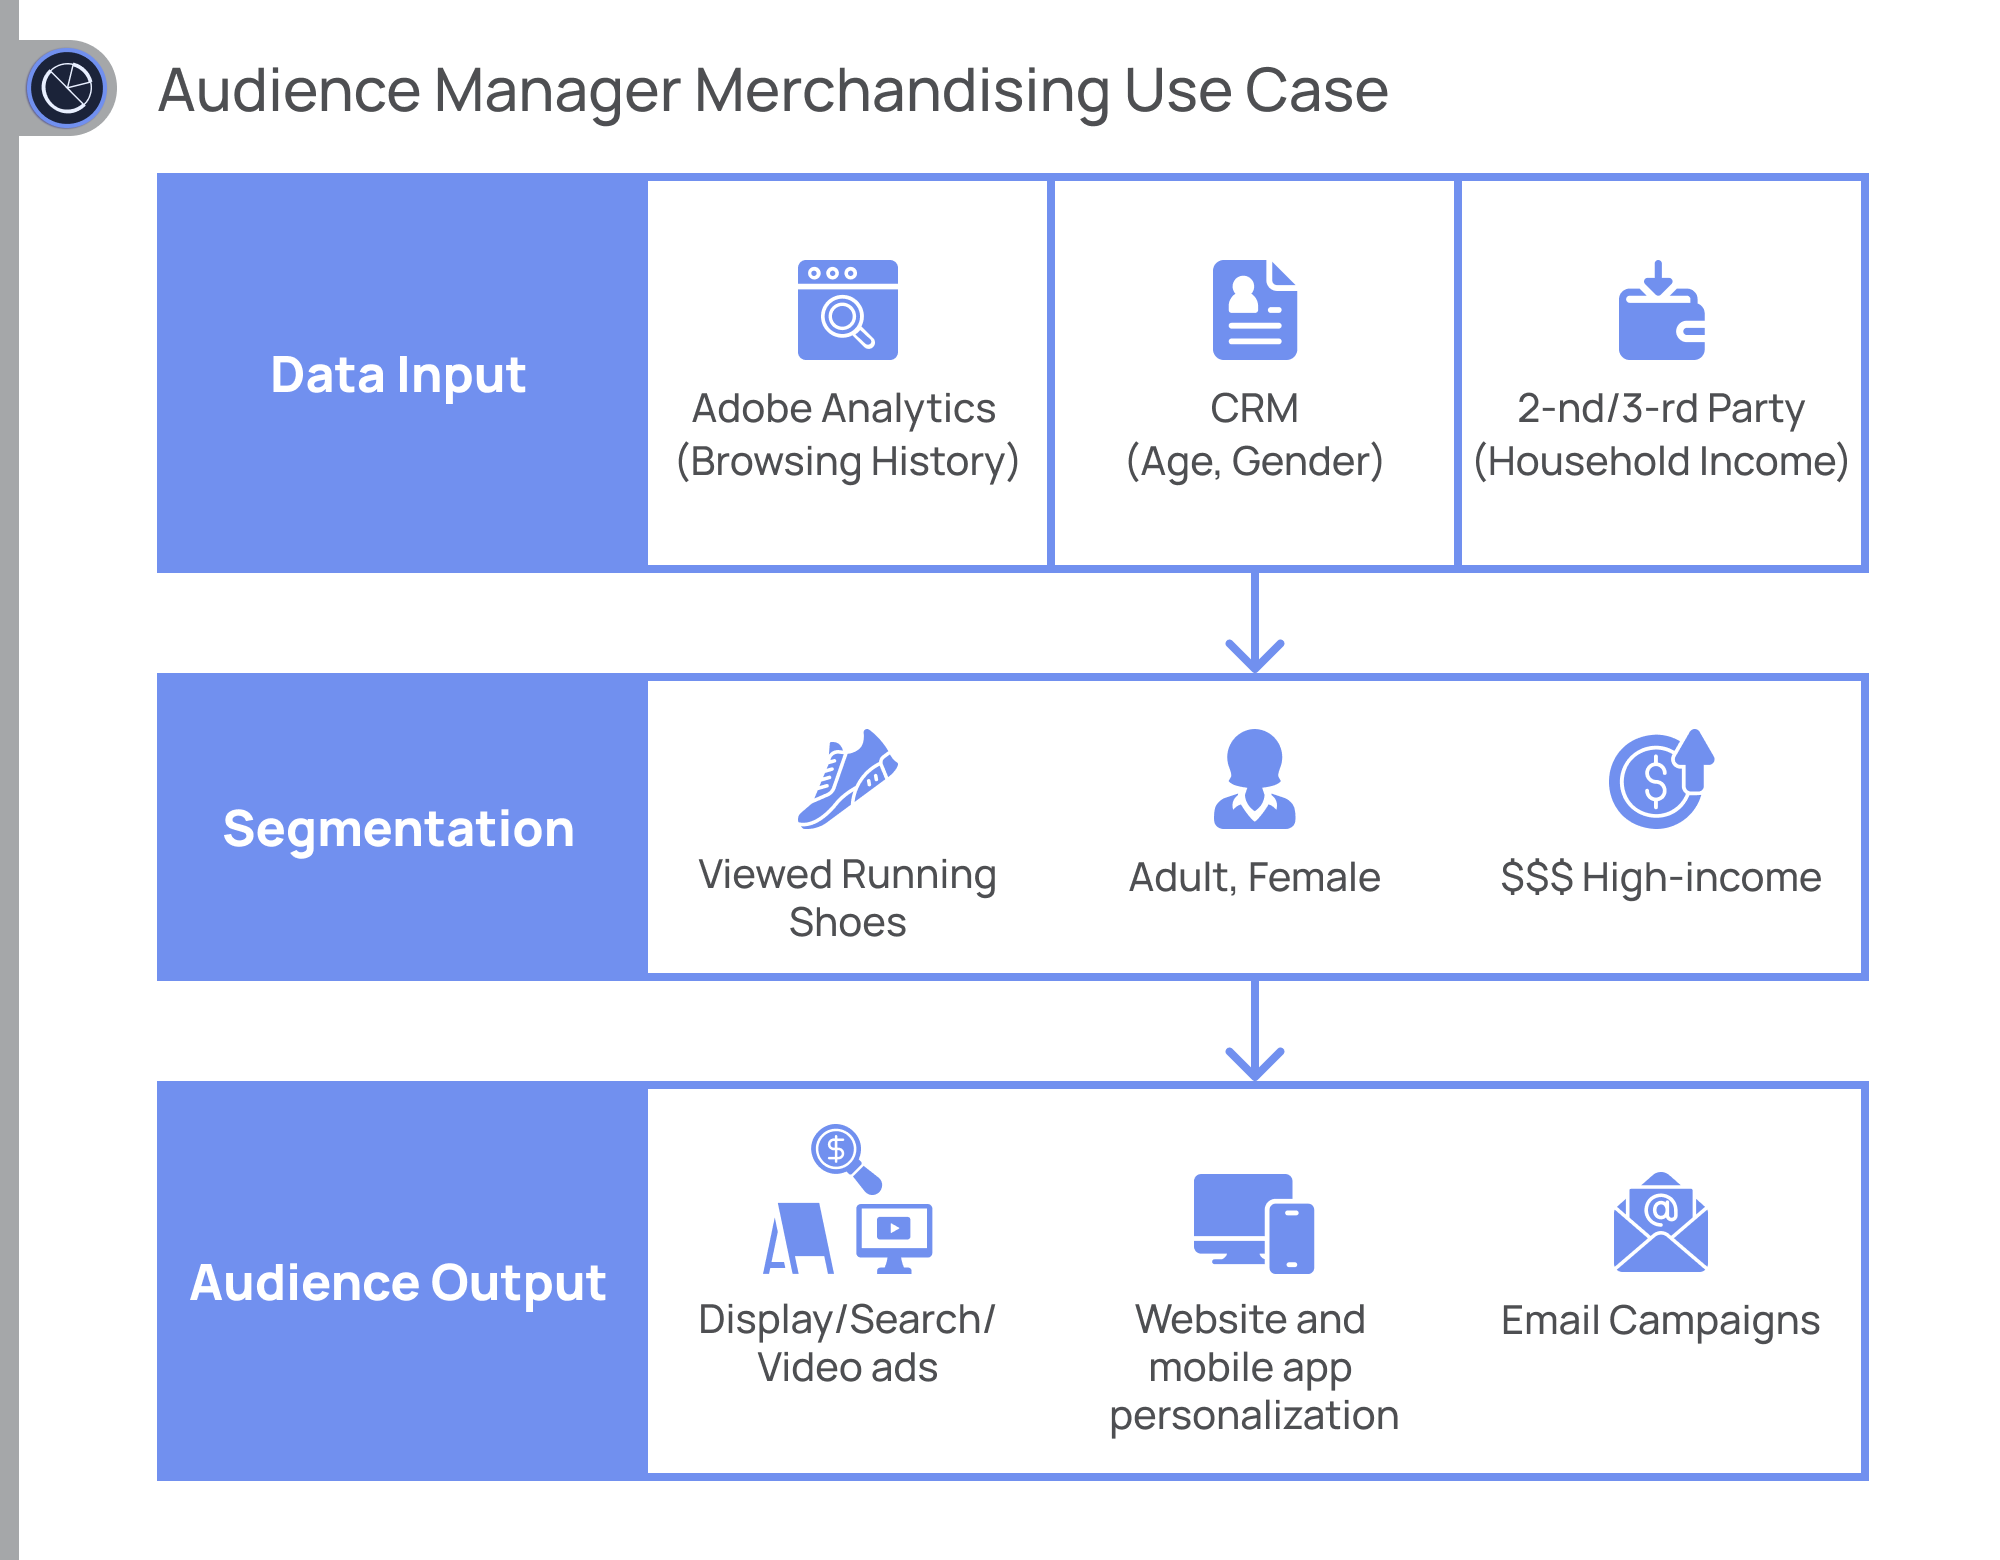 Use case for Audience Manager empowering merchandising